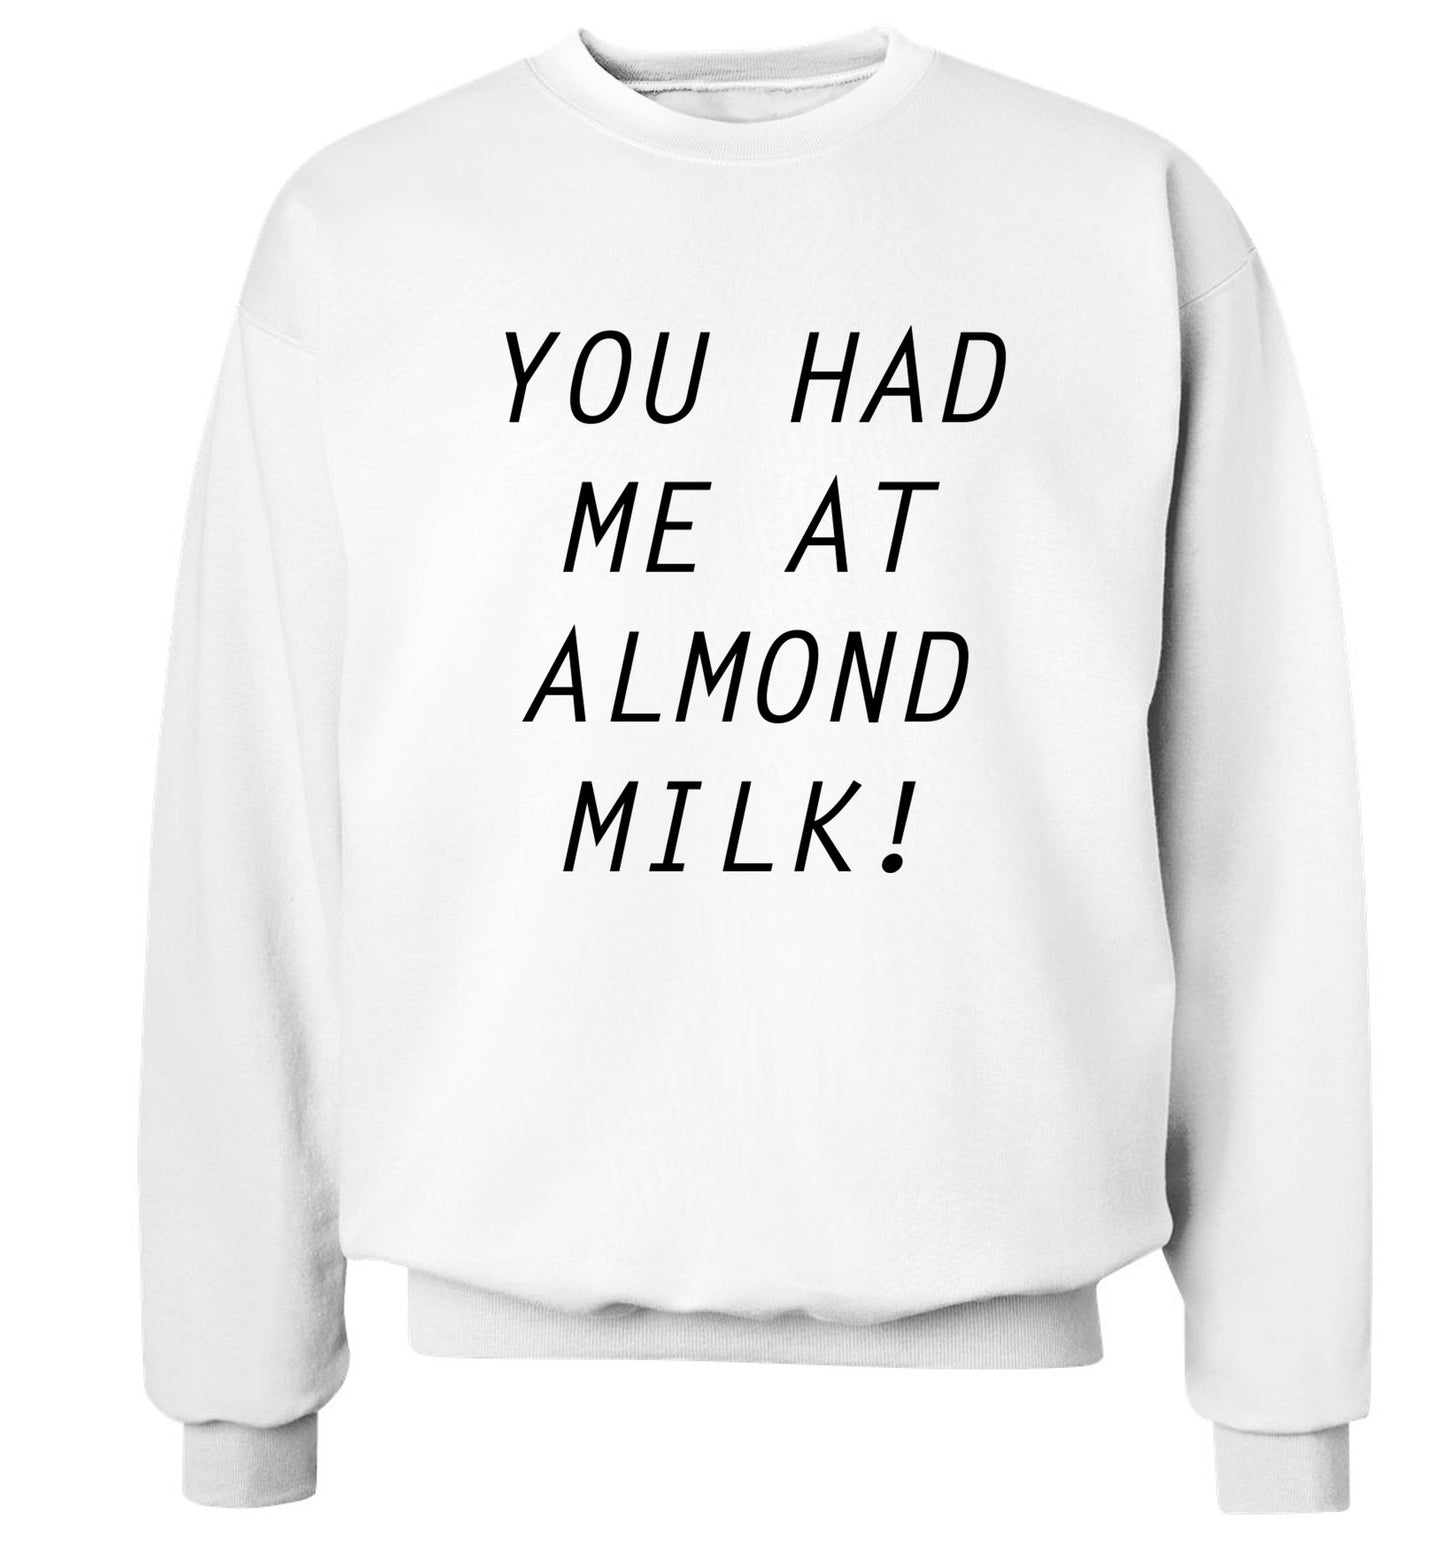 You had me at almond milk Adult's unisex white Sweater 2XL